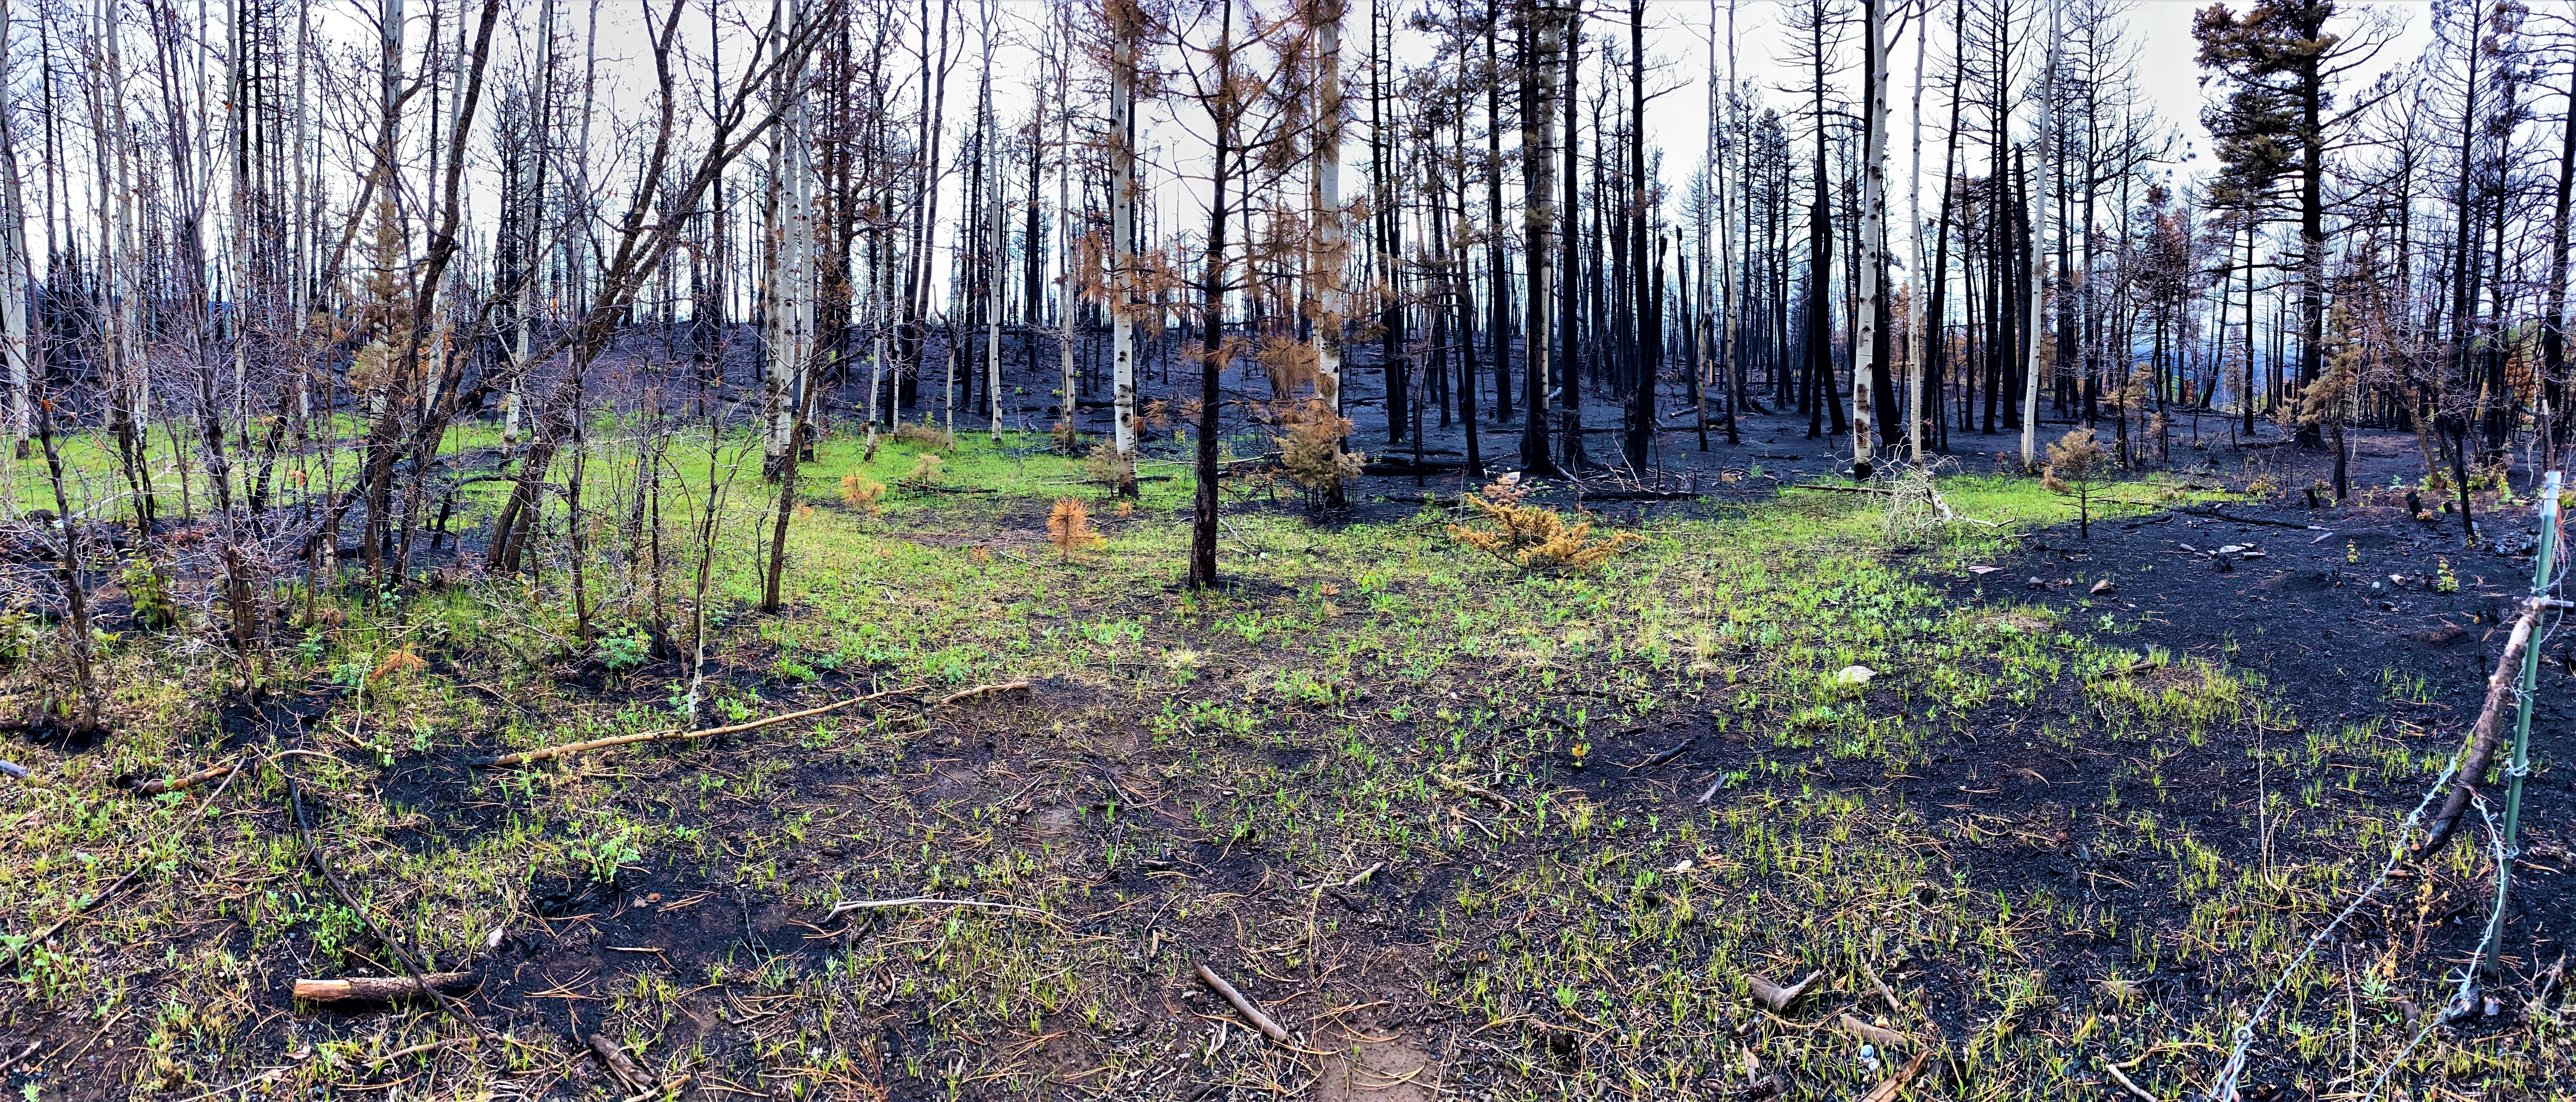 New green growth on ground under burned trees